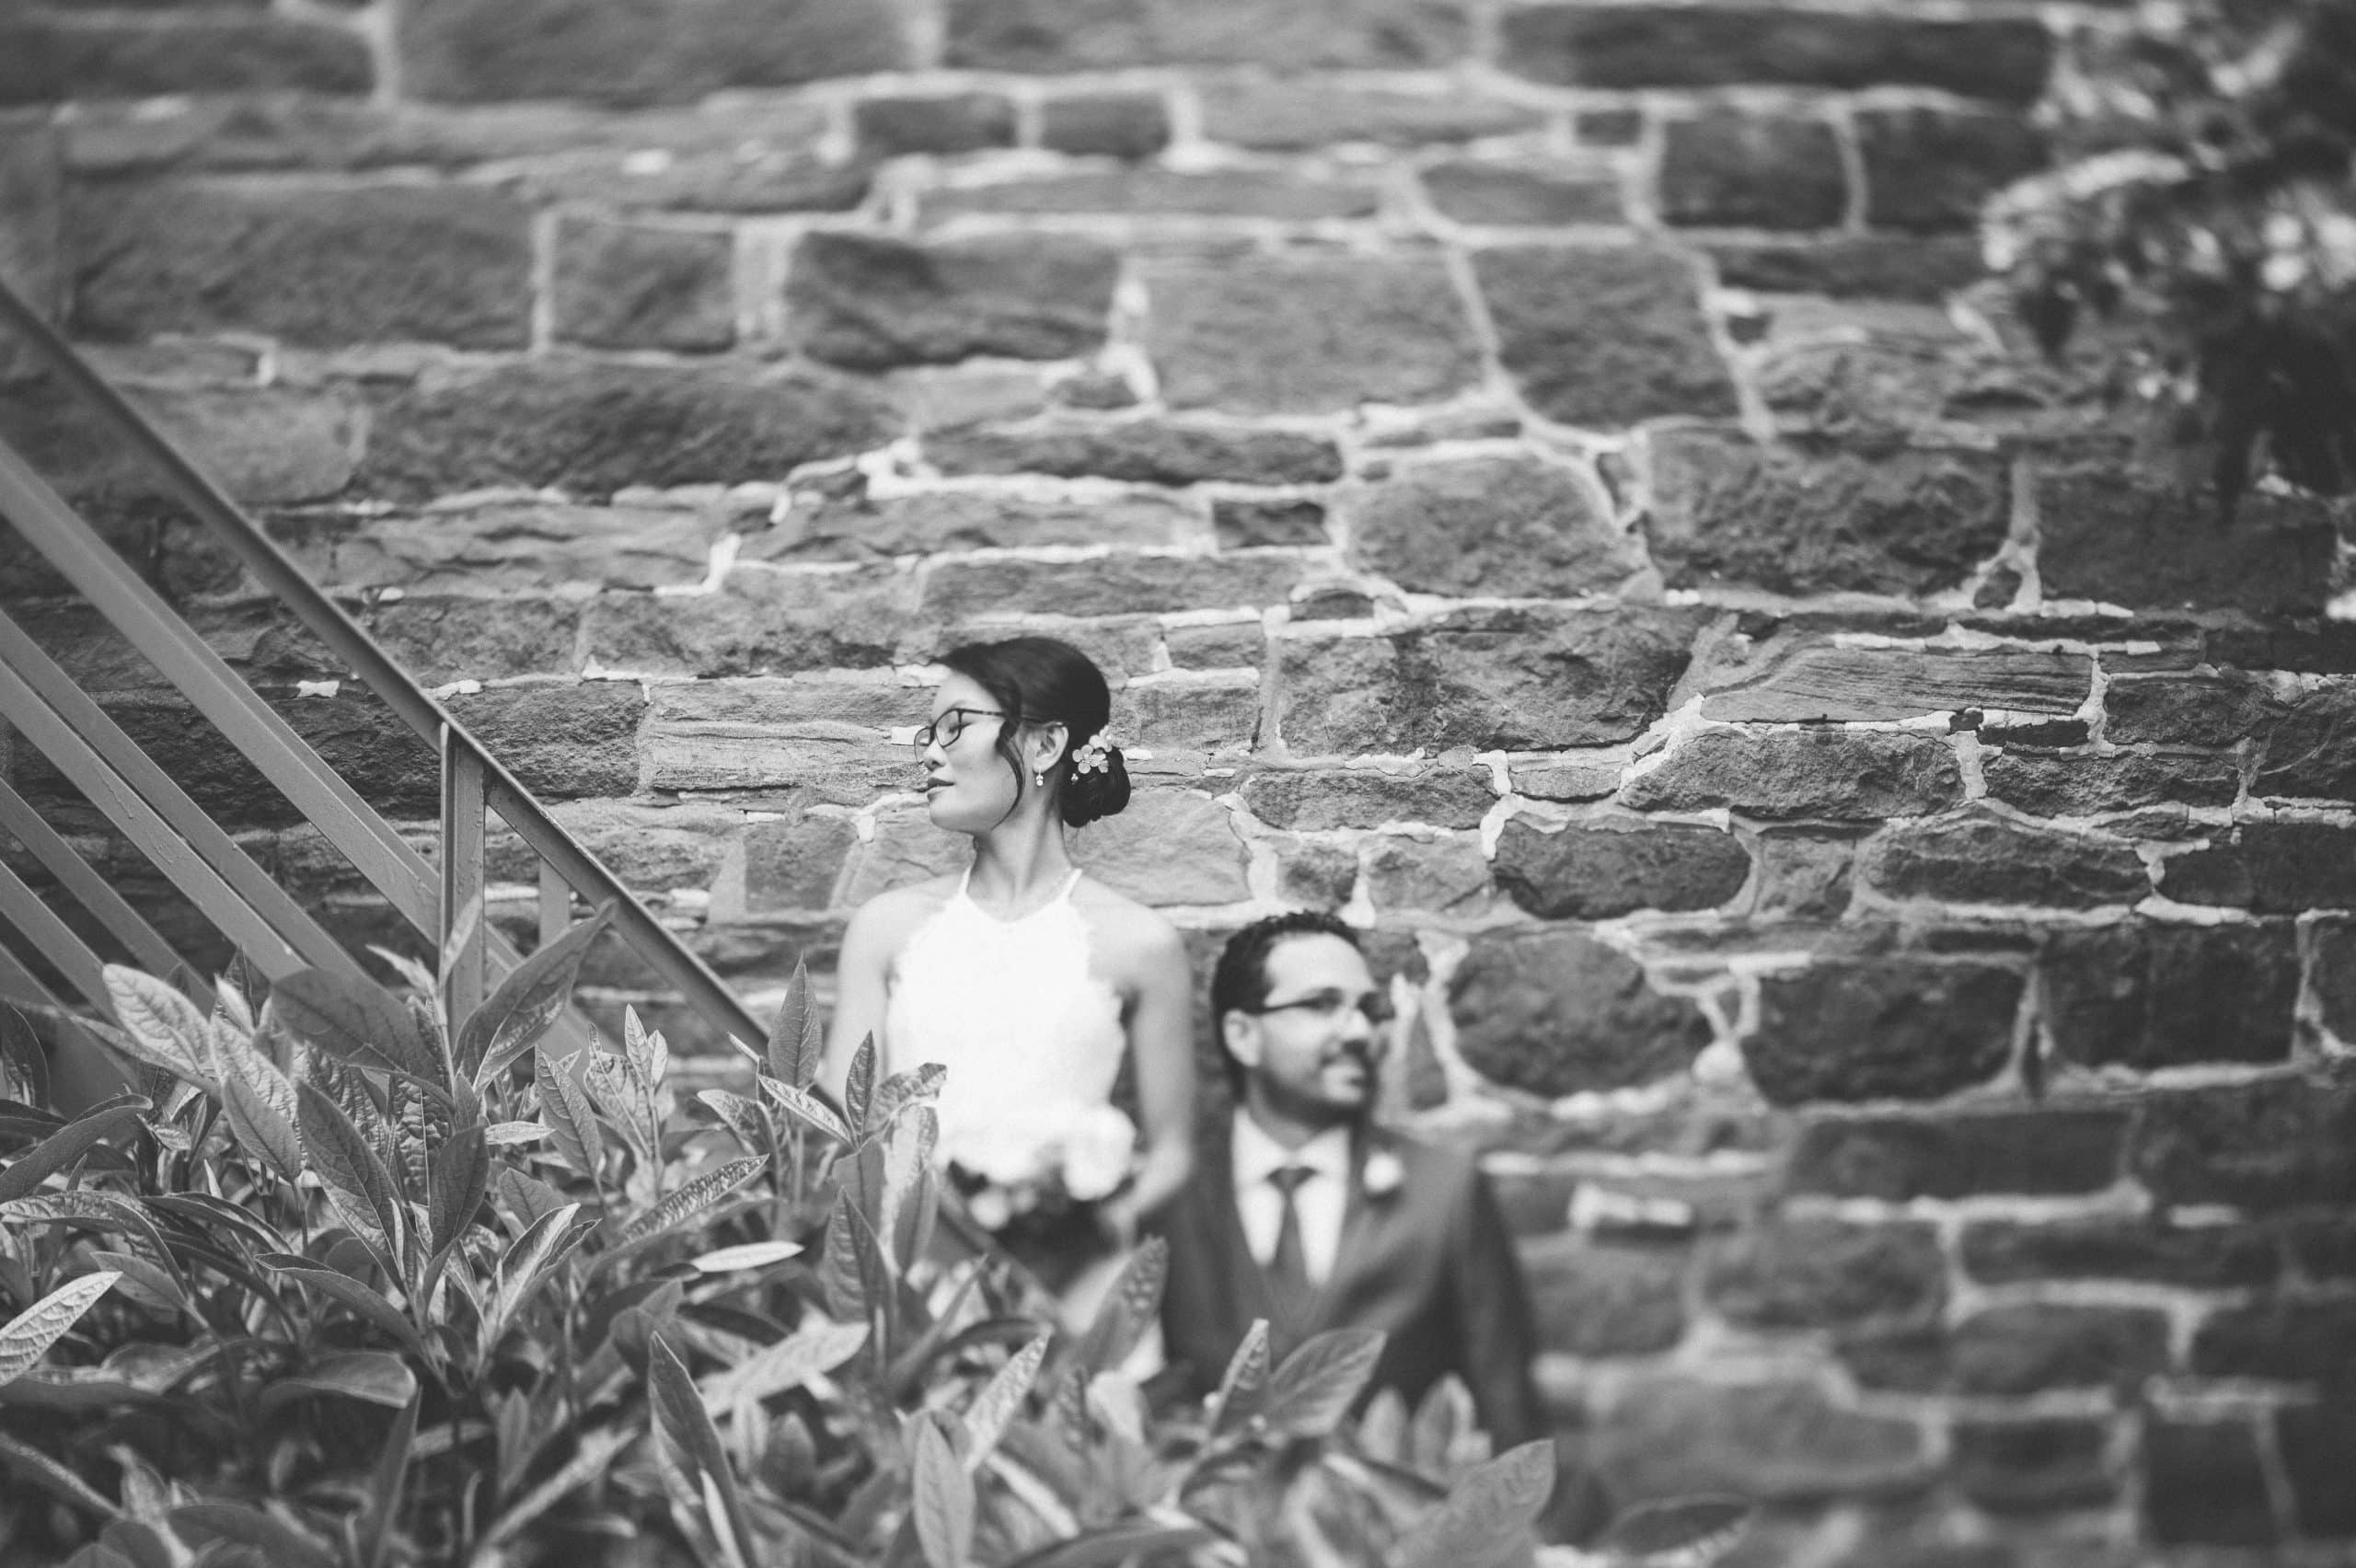 Jessica & Cory's rustic NJ wedding at the Woolverton Inn, captured by fun, candid, photojournalistic wedding photographer Ben Lau.